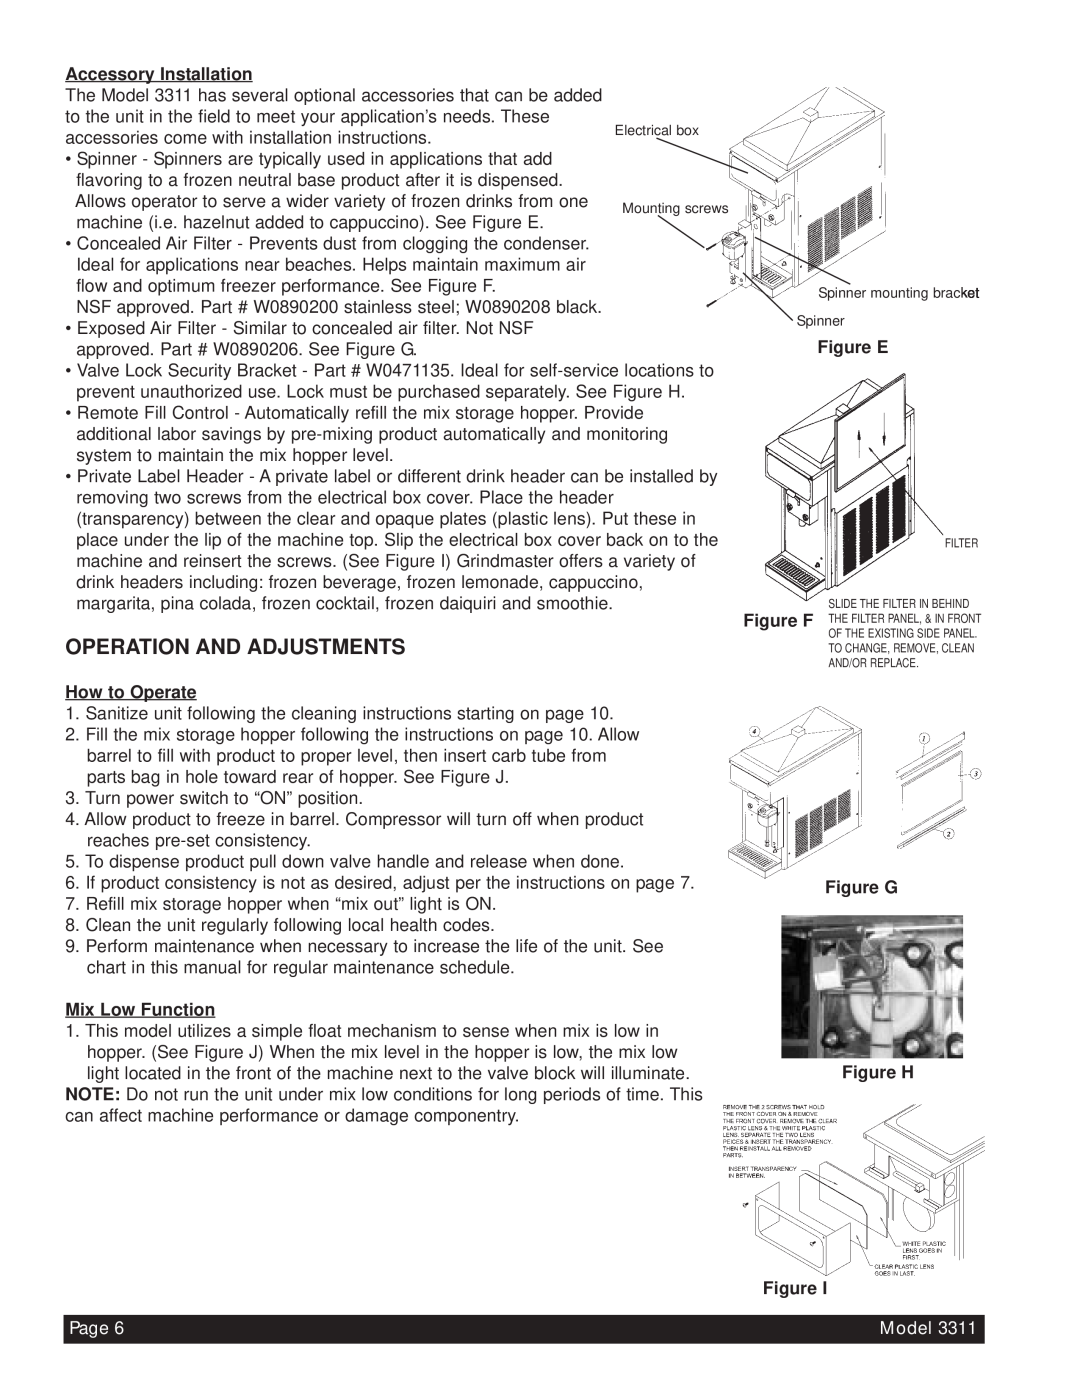 Beverage-Air 3311 manual Accessory Installation, How to Operate, Mix Low Function, Page, Figure E, Figure G Figure H Figure 